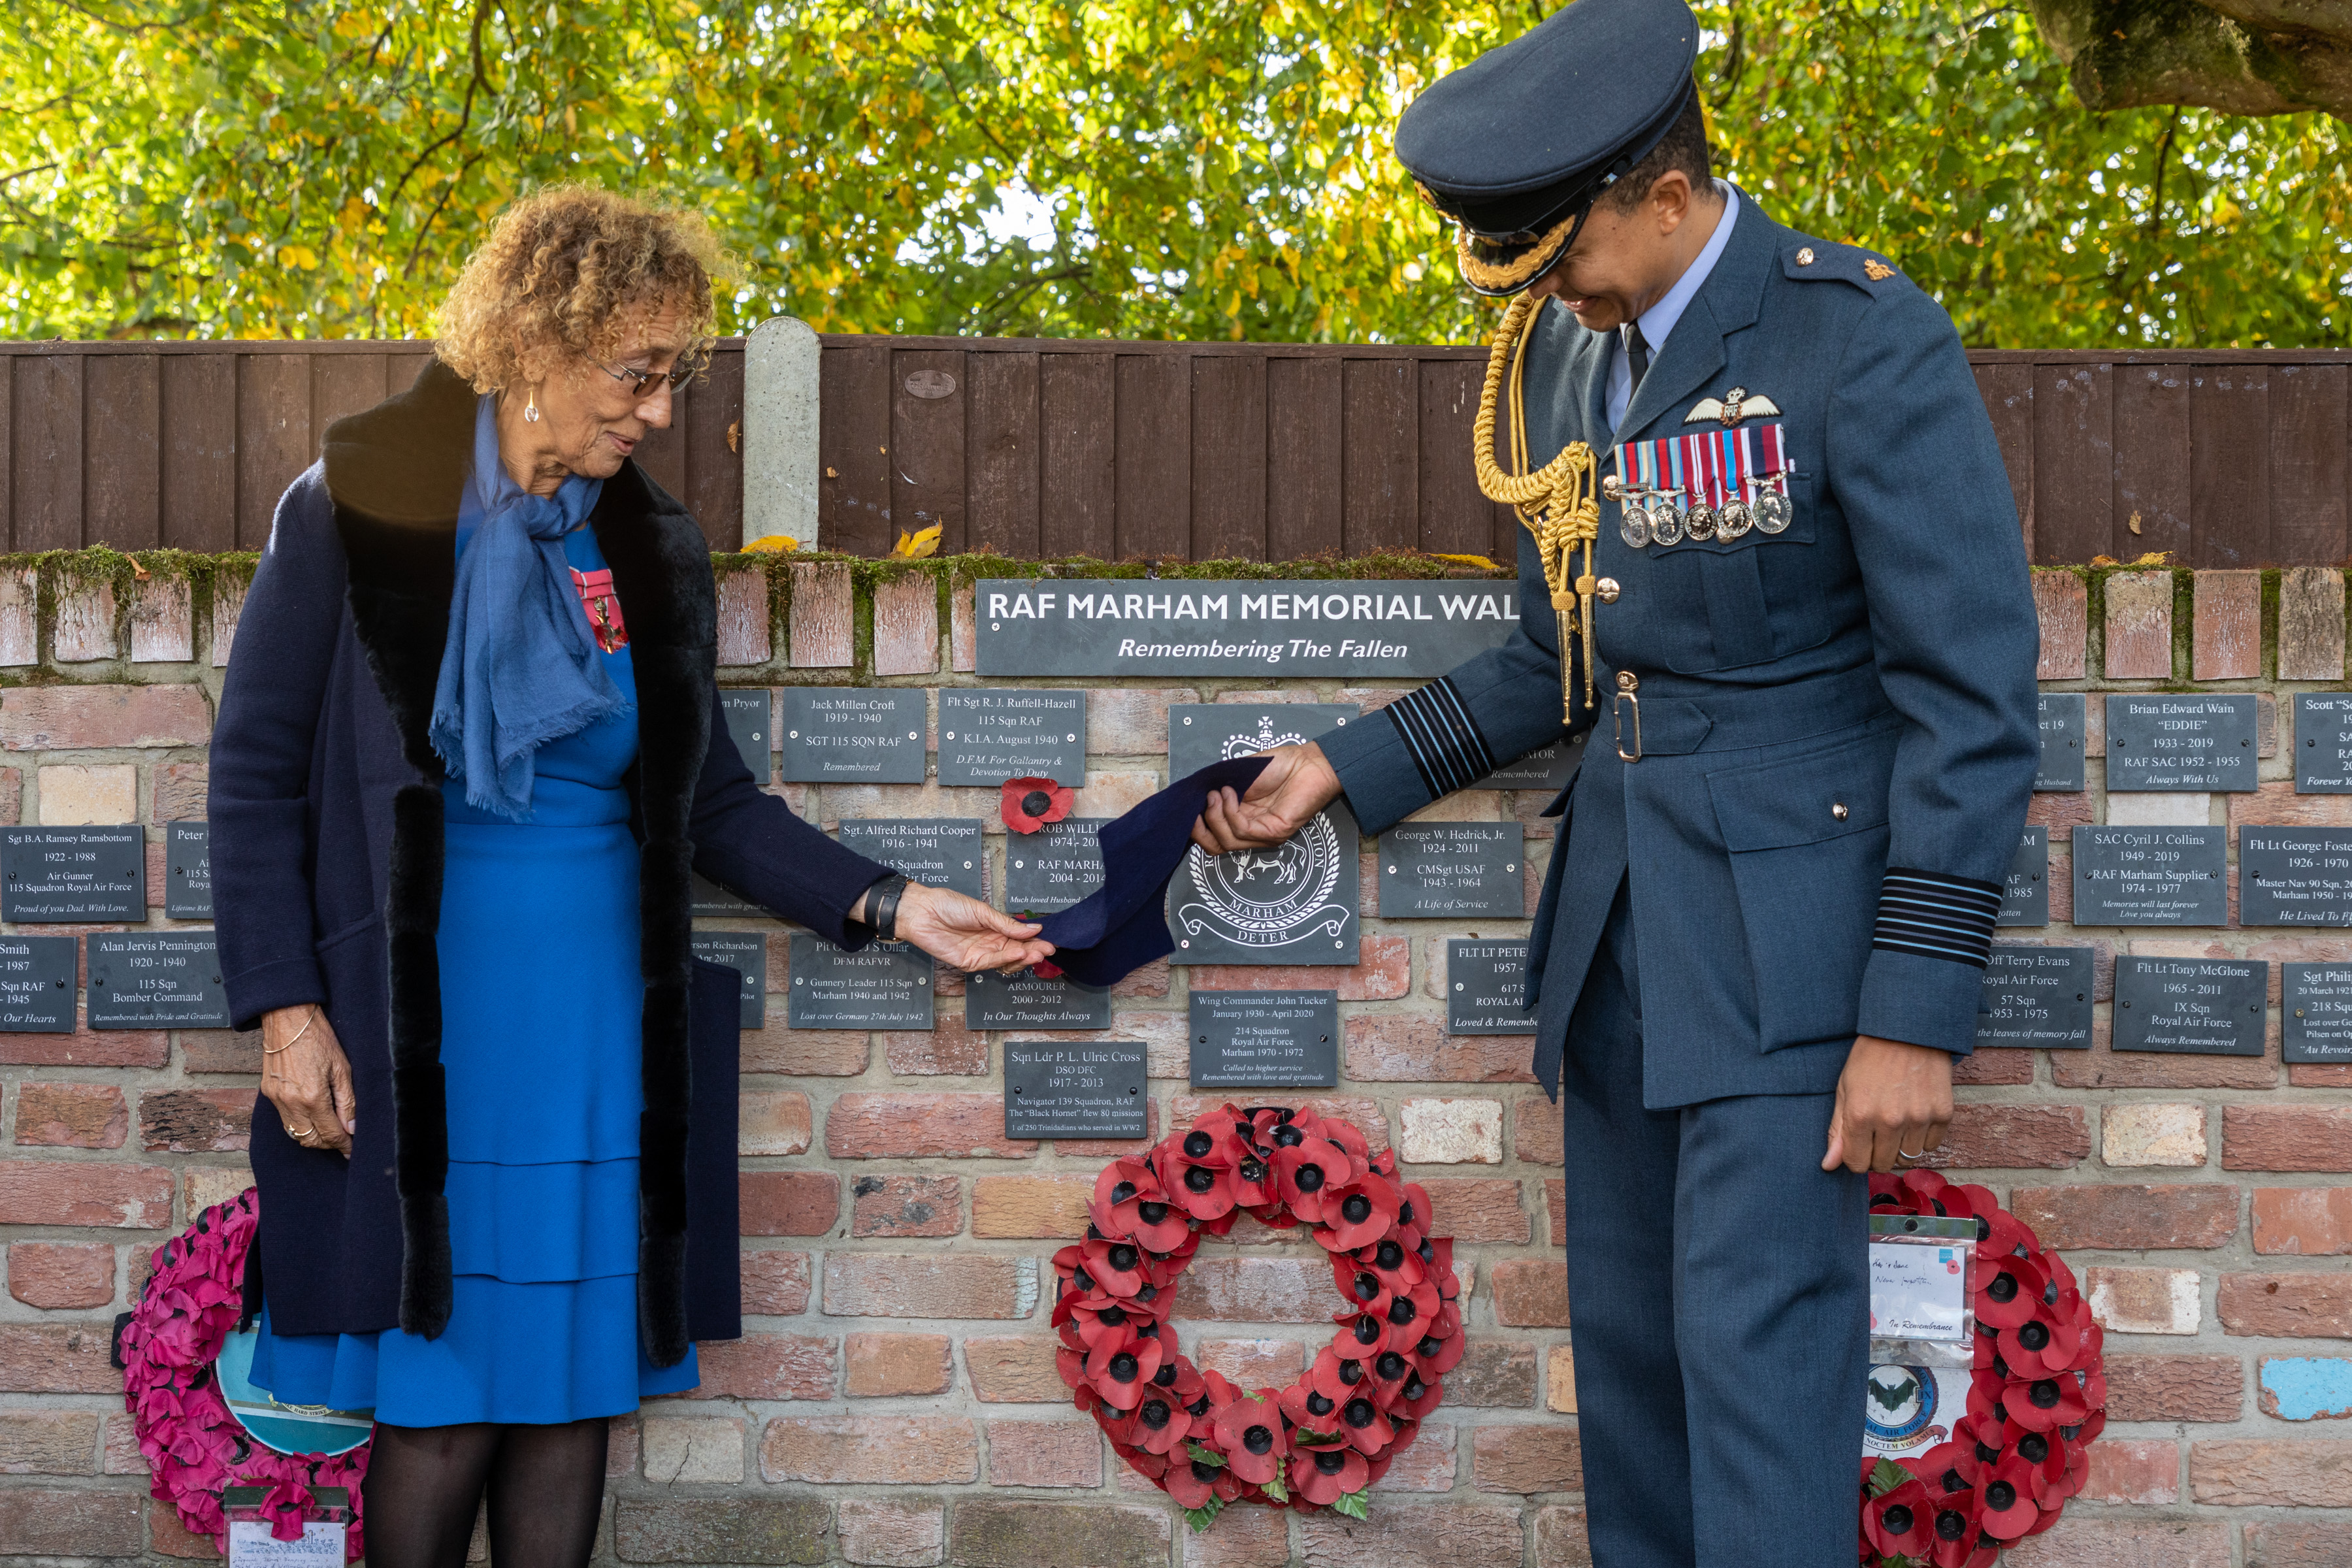 Image shows RAF aviator and civilian removing a cloth from a small plague on a memorial wall.